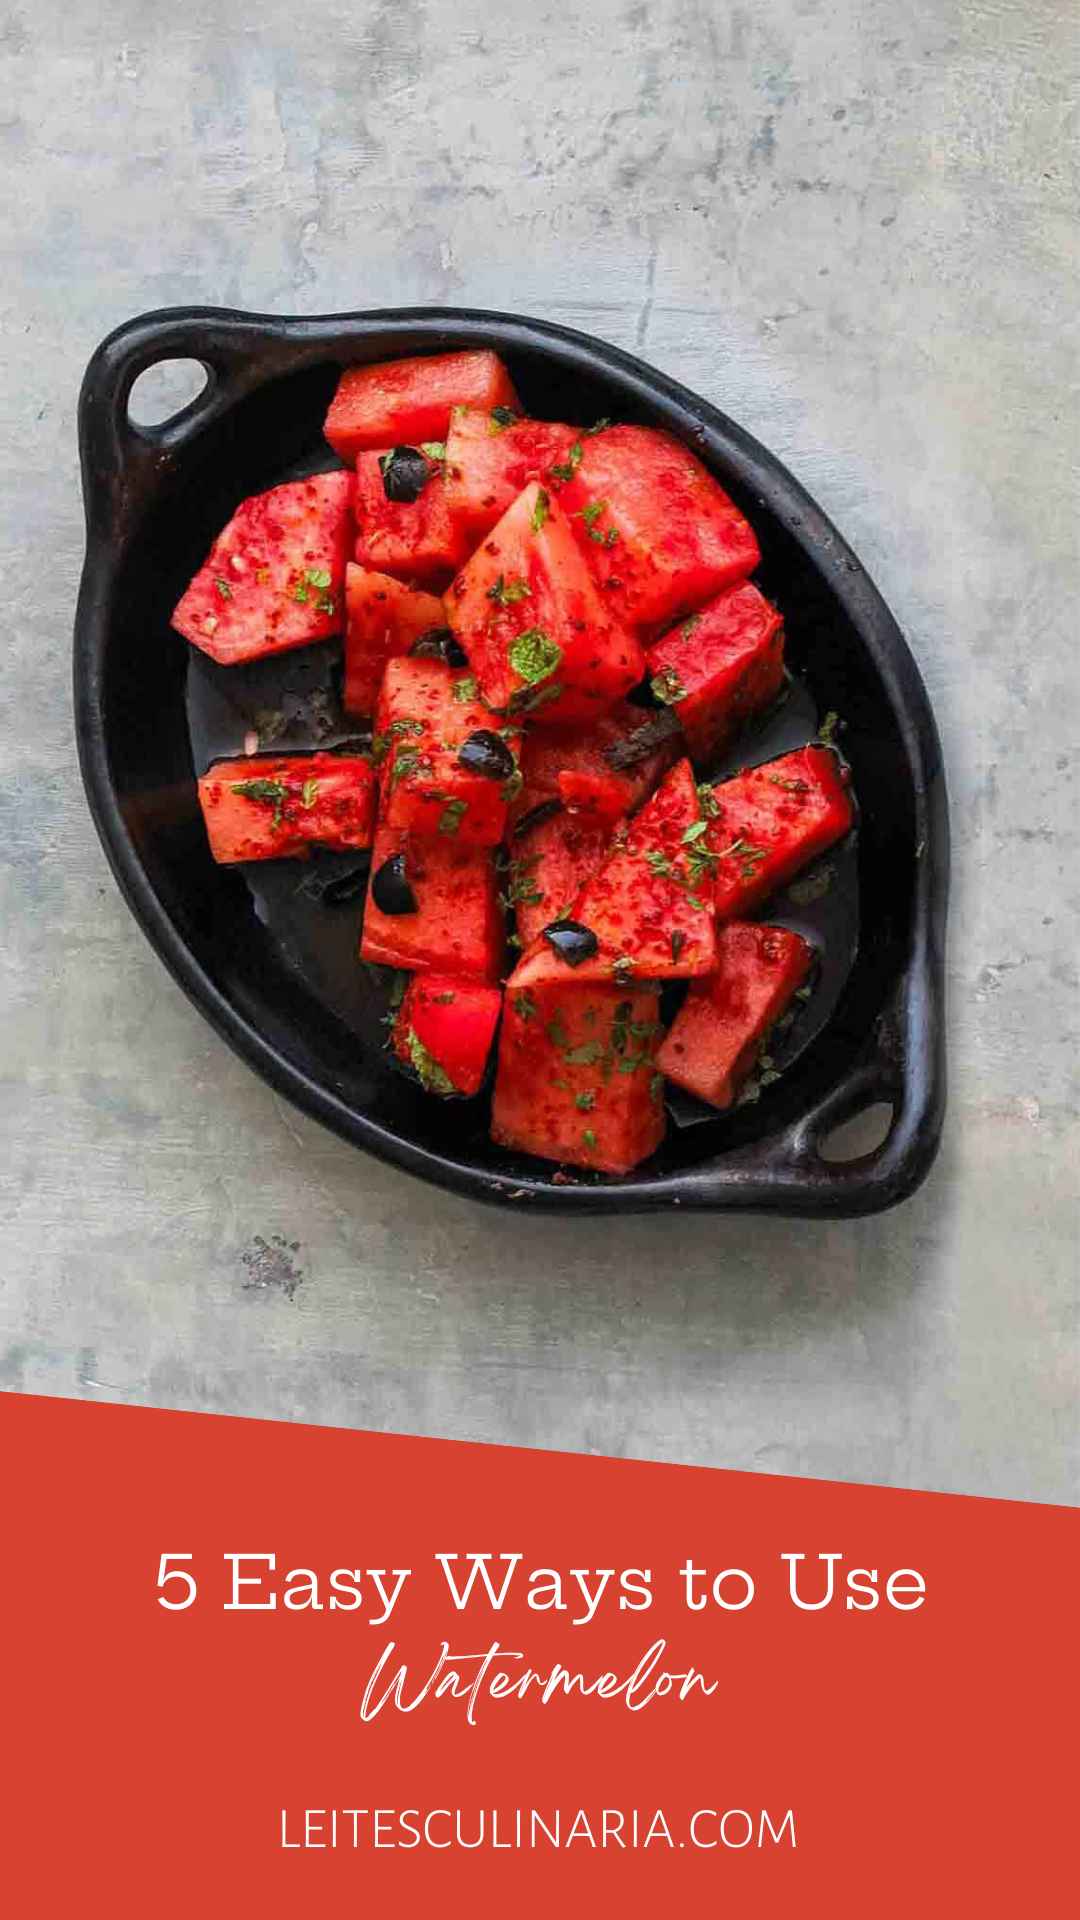 A black dish filled with cubed watermelon salad, olives, and mint leaves.